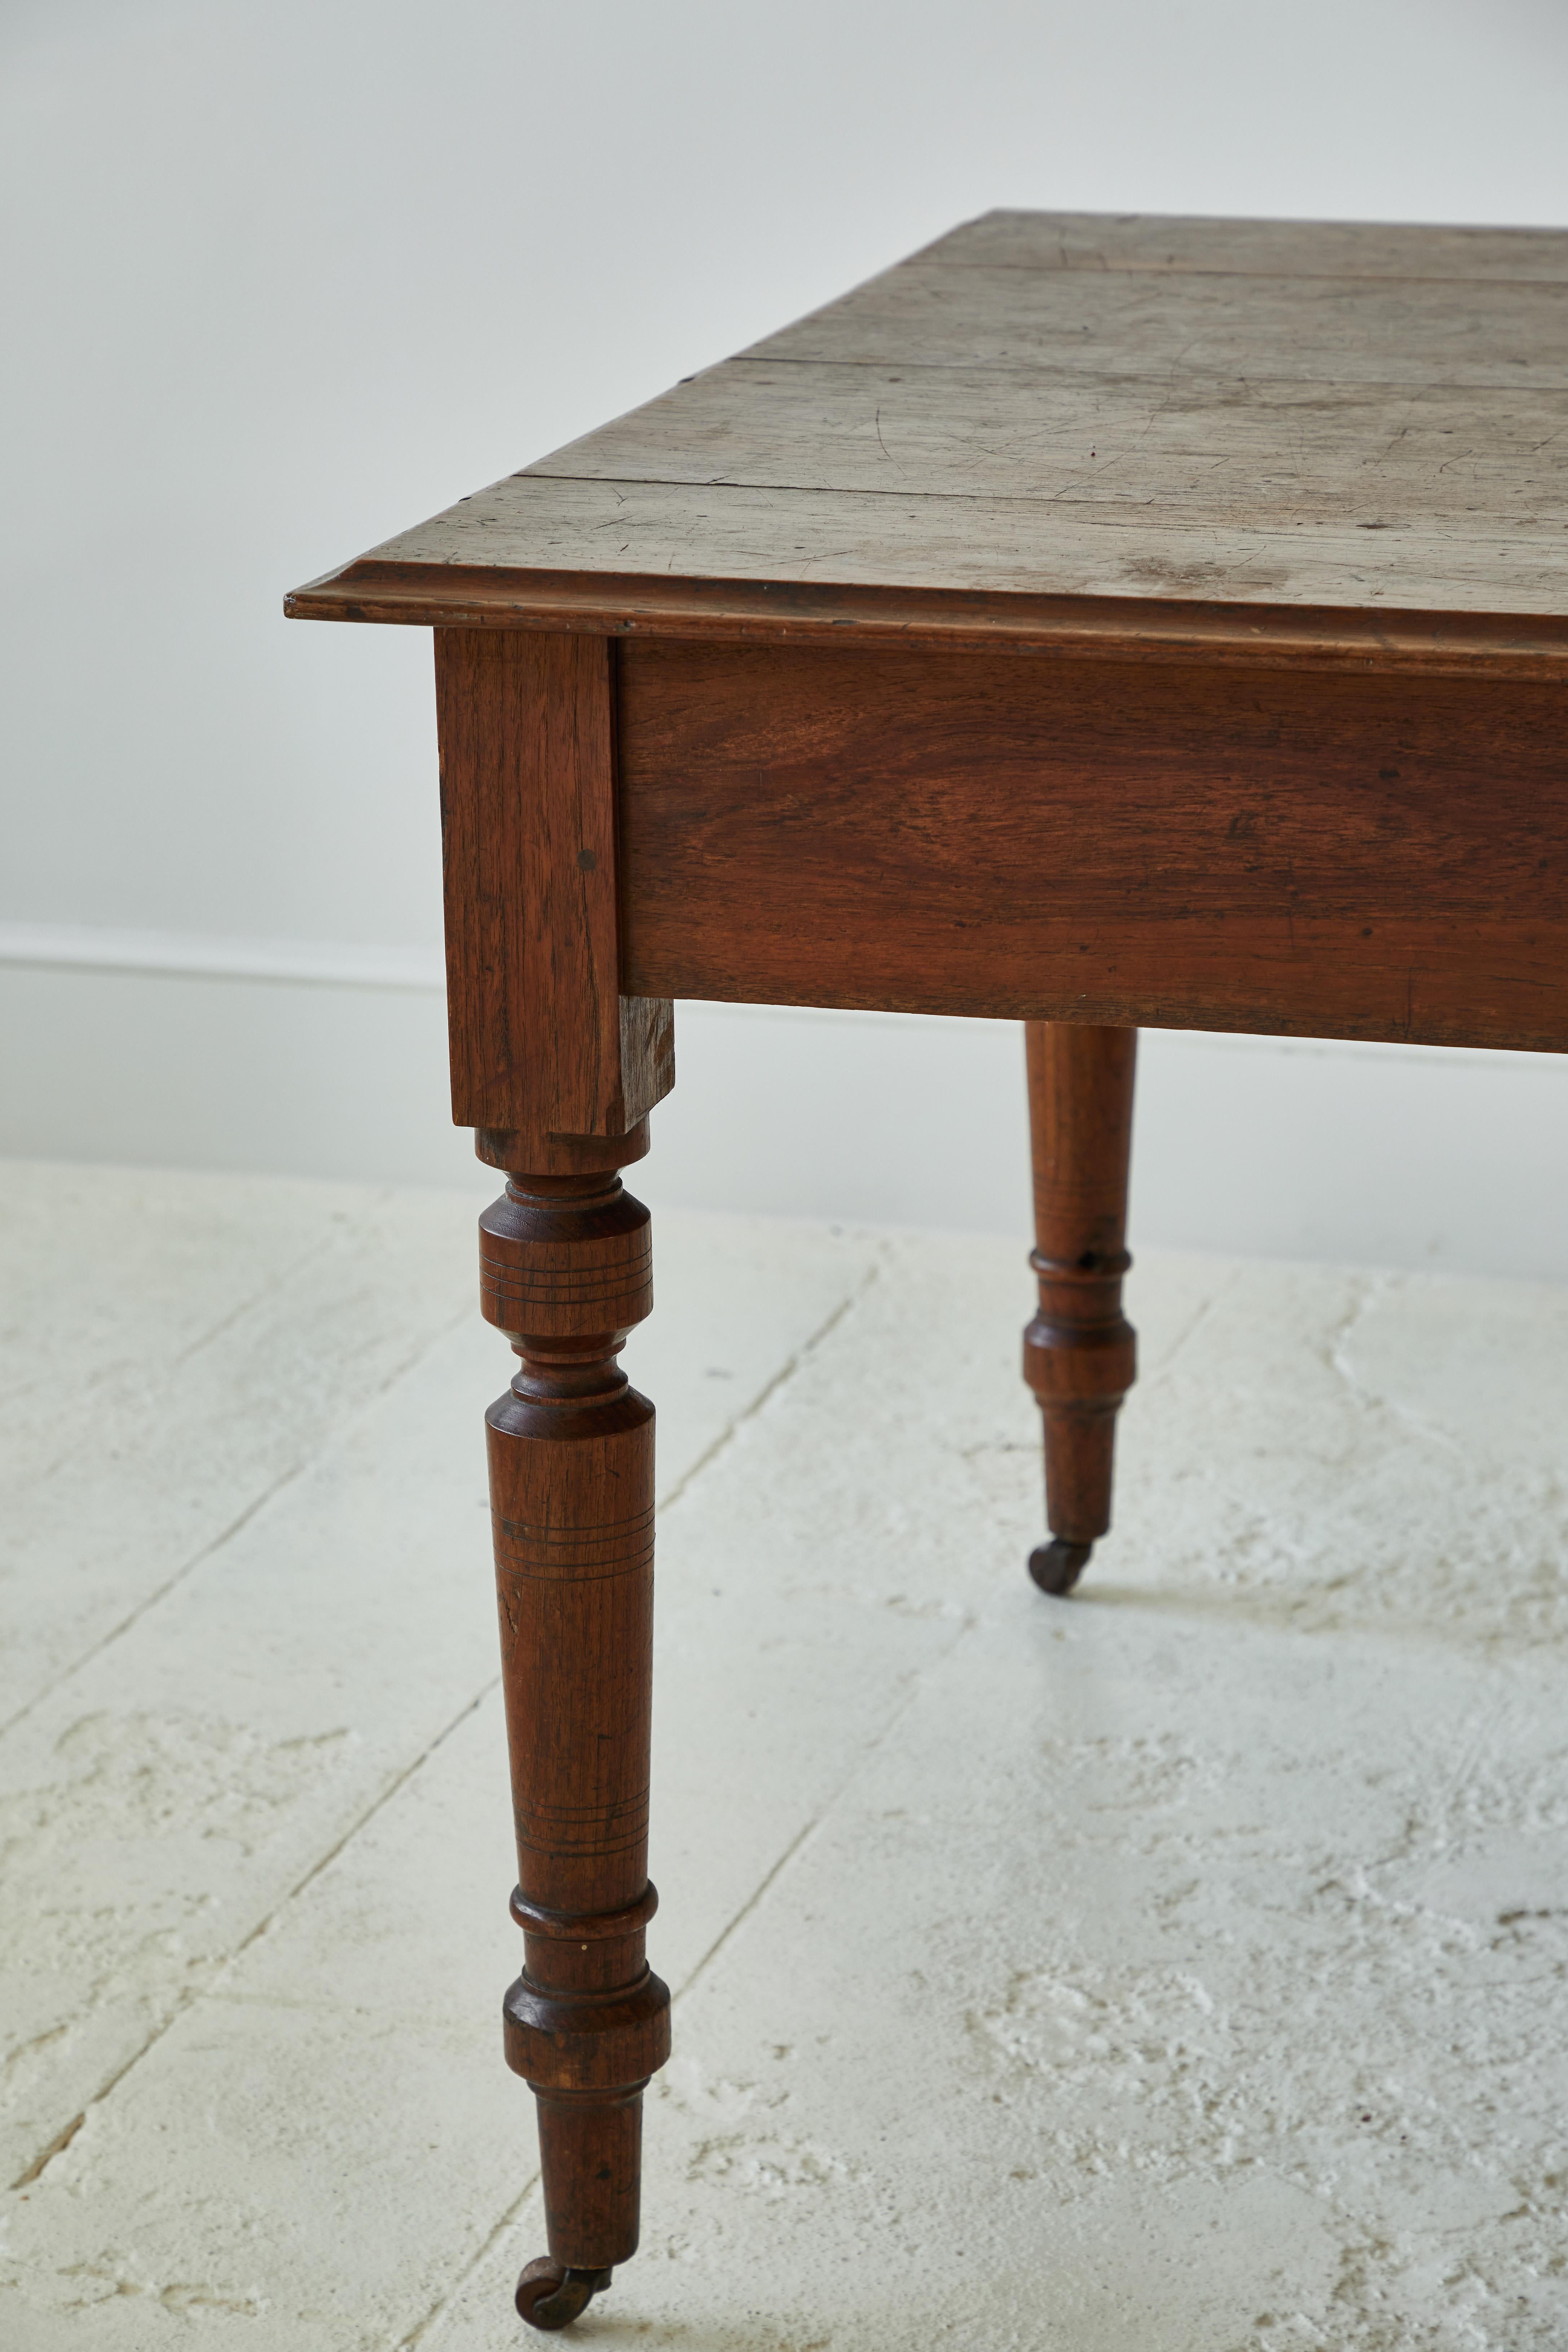 20th Century French Square Table on Casters